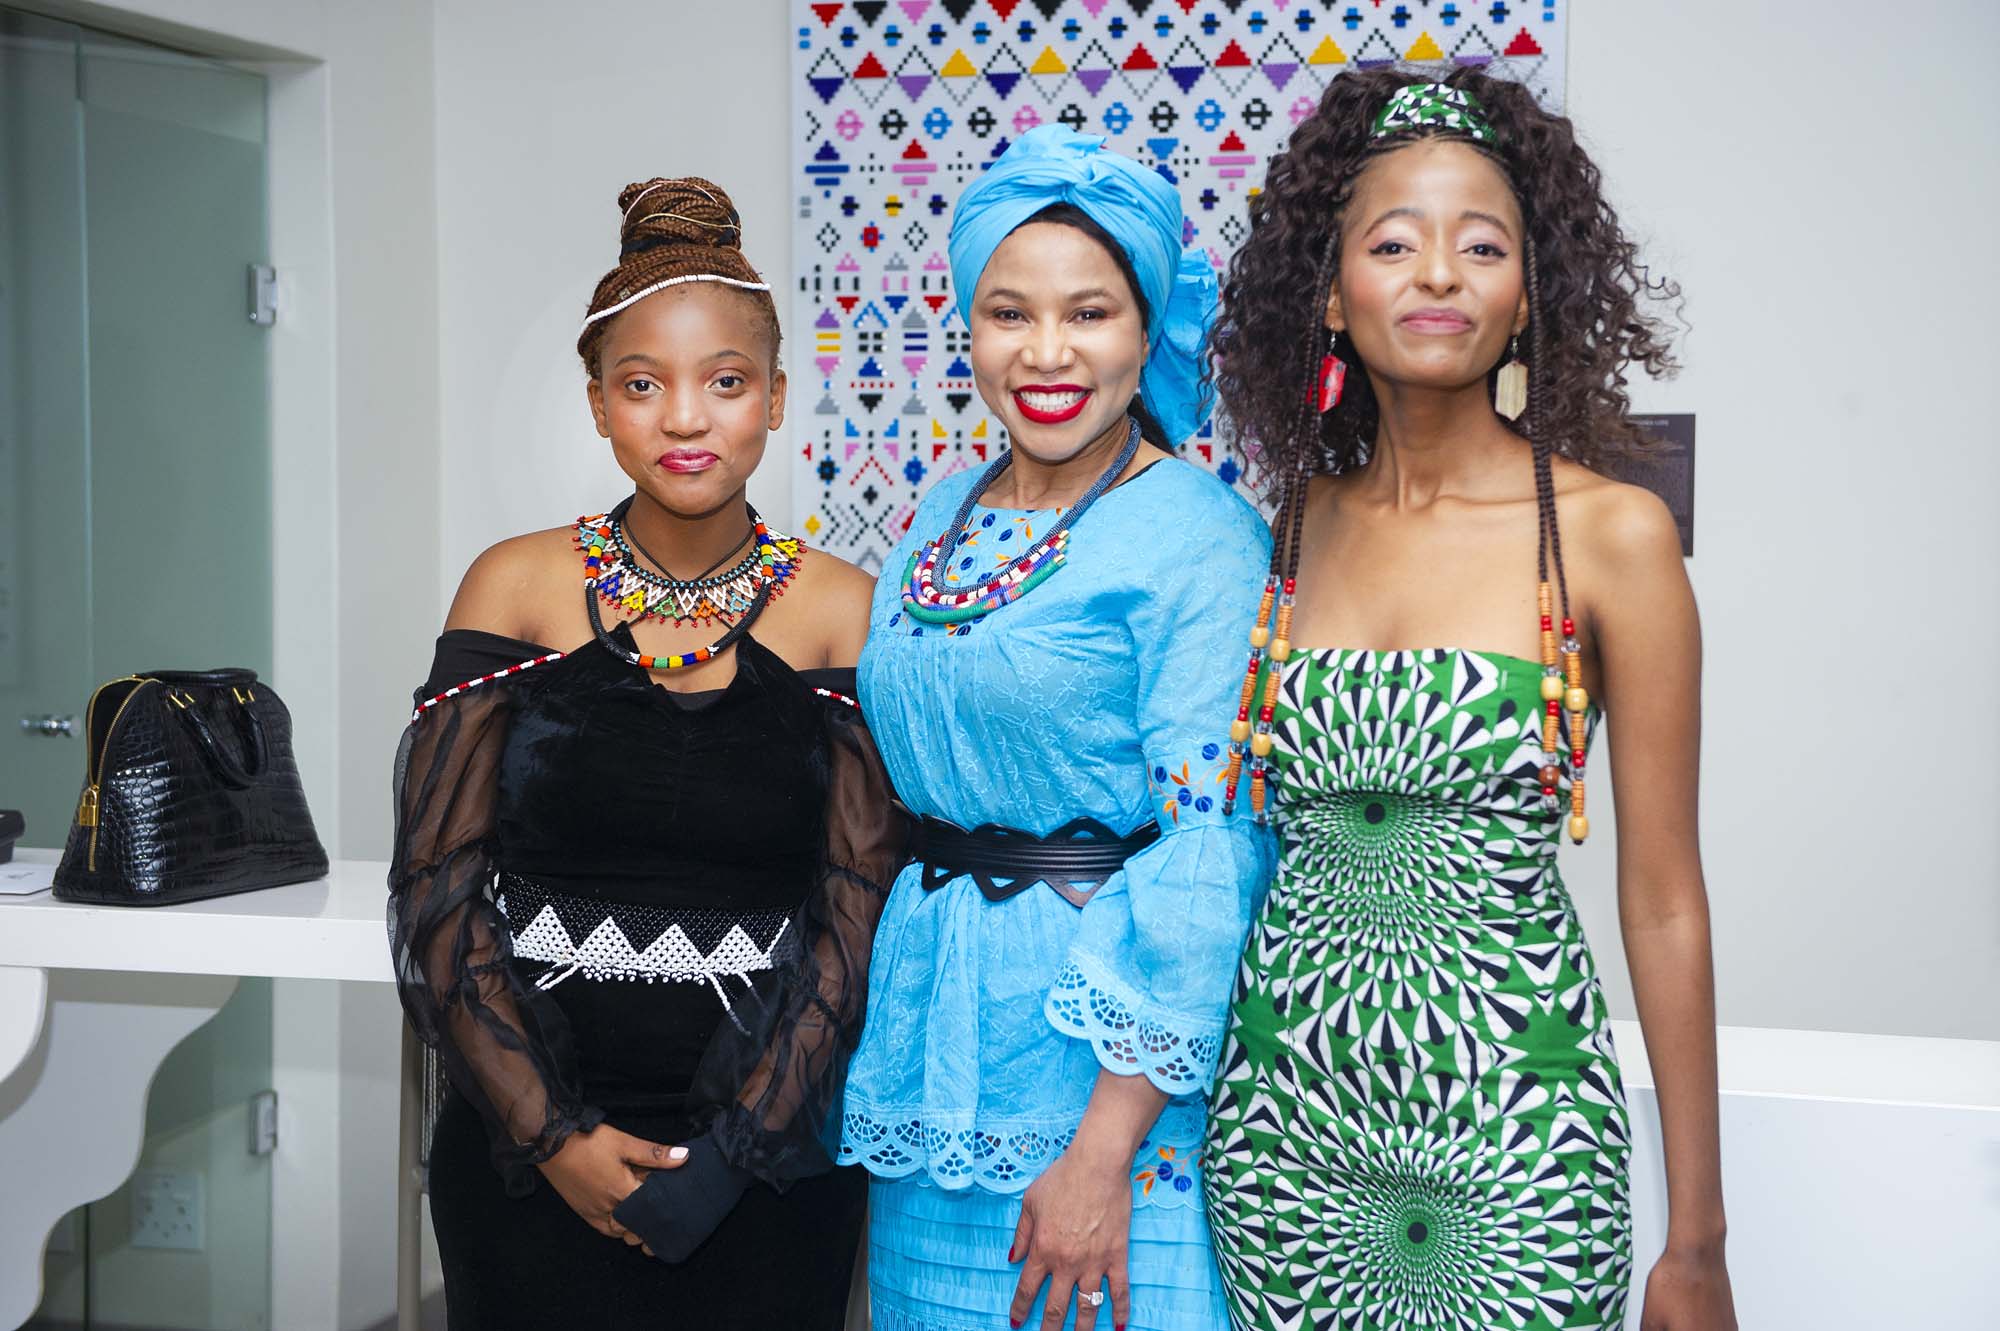 The 2022 SRC leadership held its Afrifund fashion fundraiser at the UCT GSB to raise funds for African International students in collaboration with Africa Fashion International. UCT Chancellor Dr Precious Moloi-Motsepe showed support by donating R3 Million to their fund. Photo Lerato Maduna.